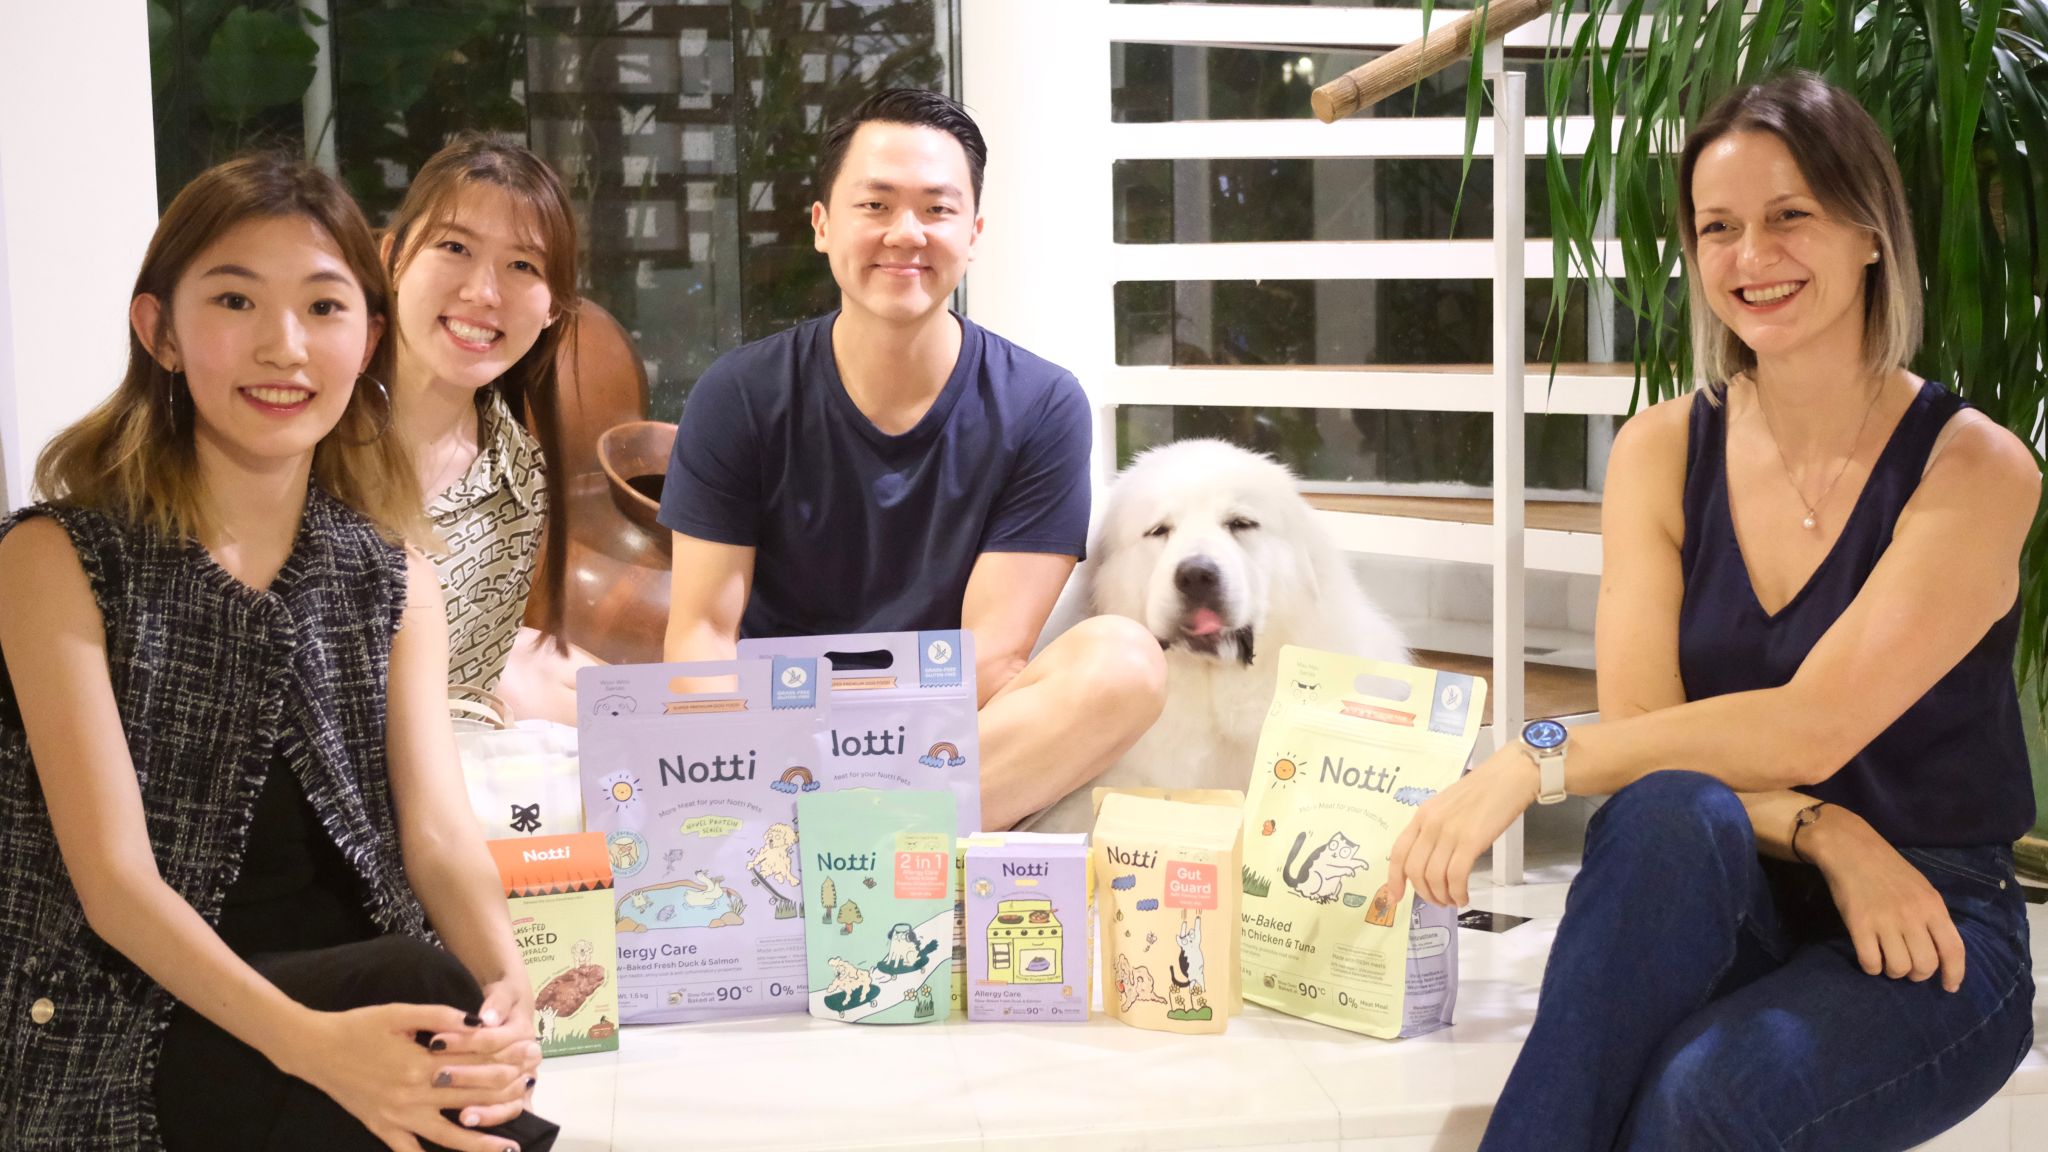 From left:  Ke Yee Yap, founder of Notti Pet Food, Amanda Cham, associate director, 500 Global, Joel Neoh, partner, First Move and Audra Pakalnyte, partner, First Move